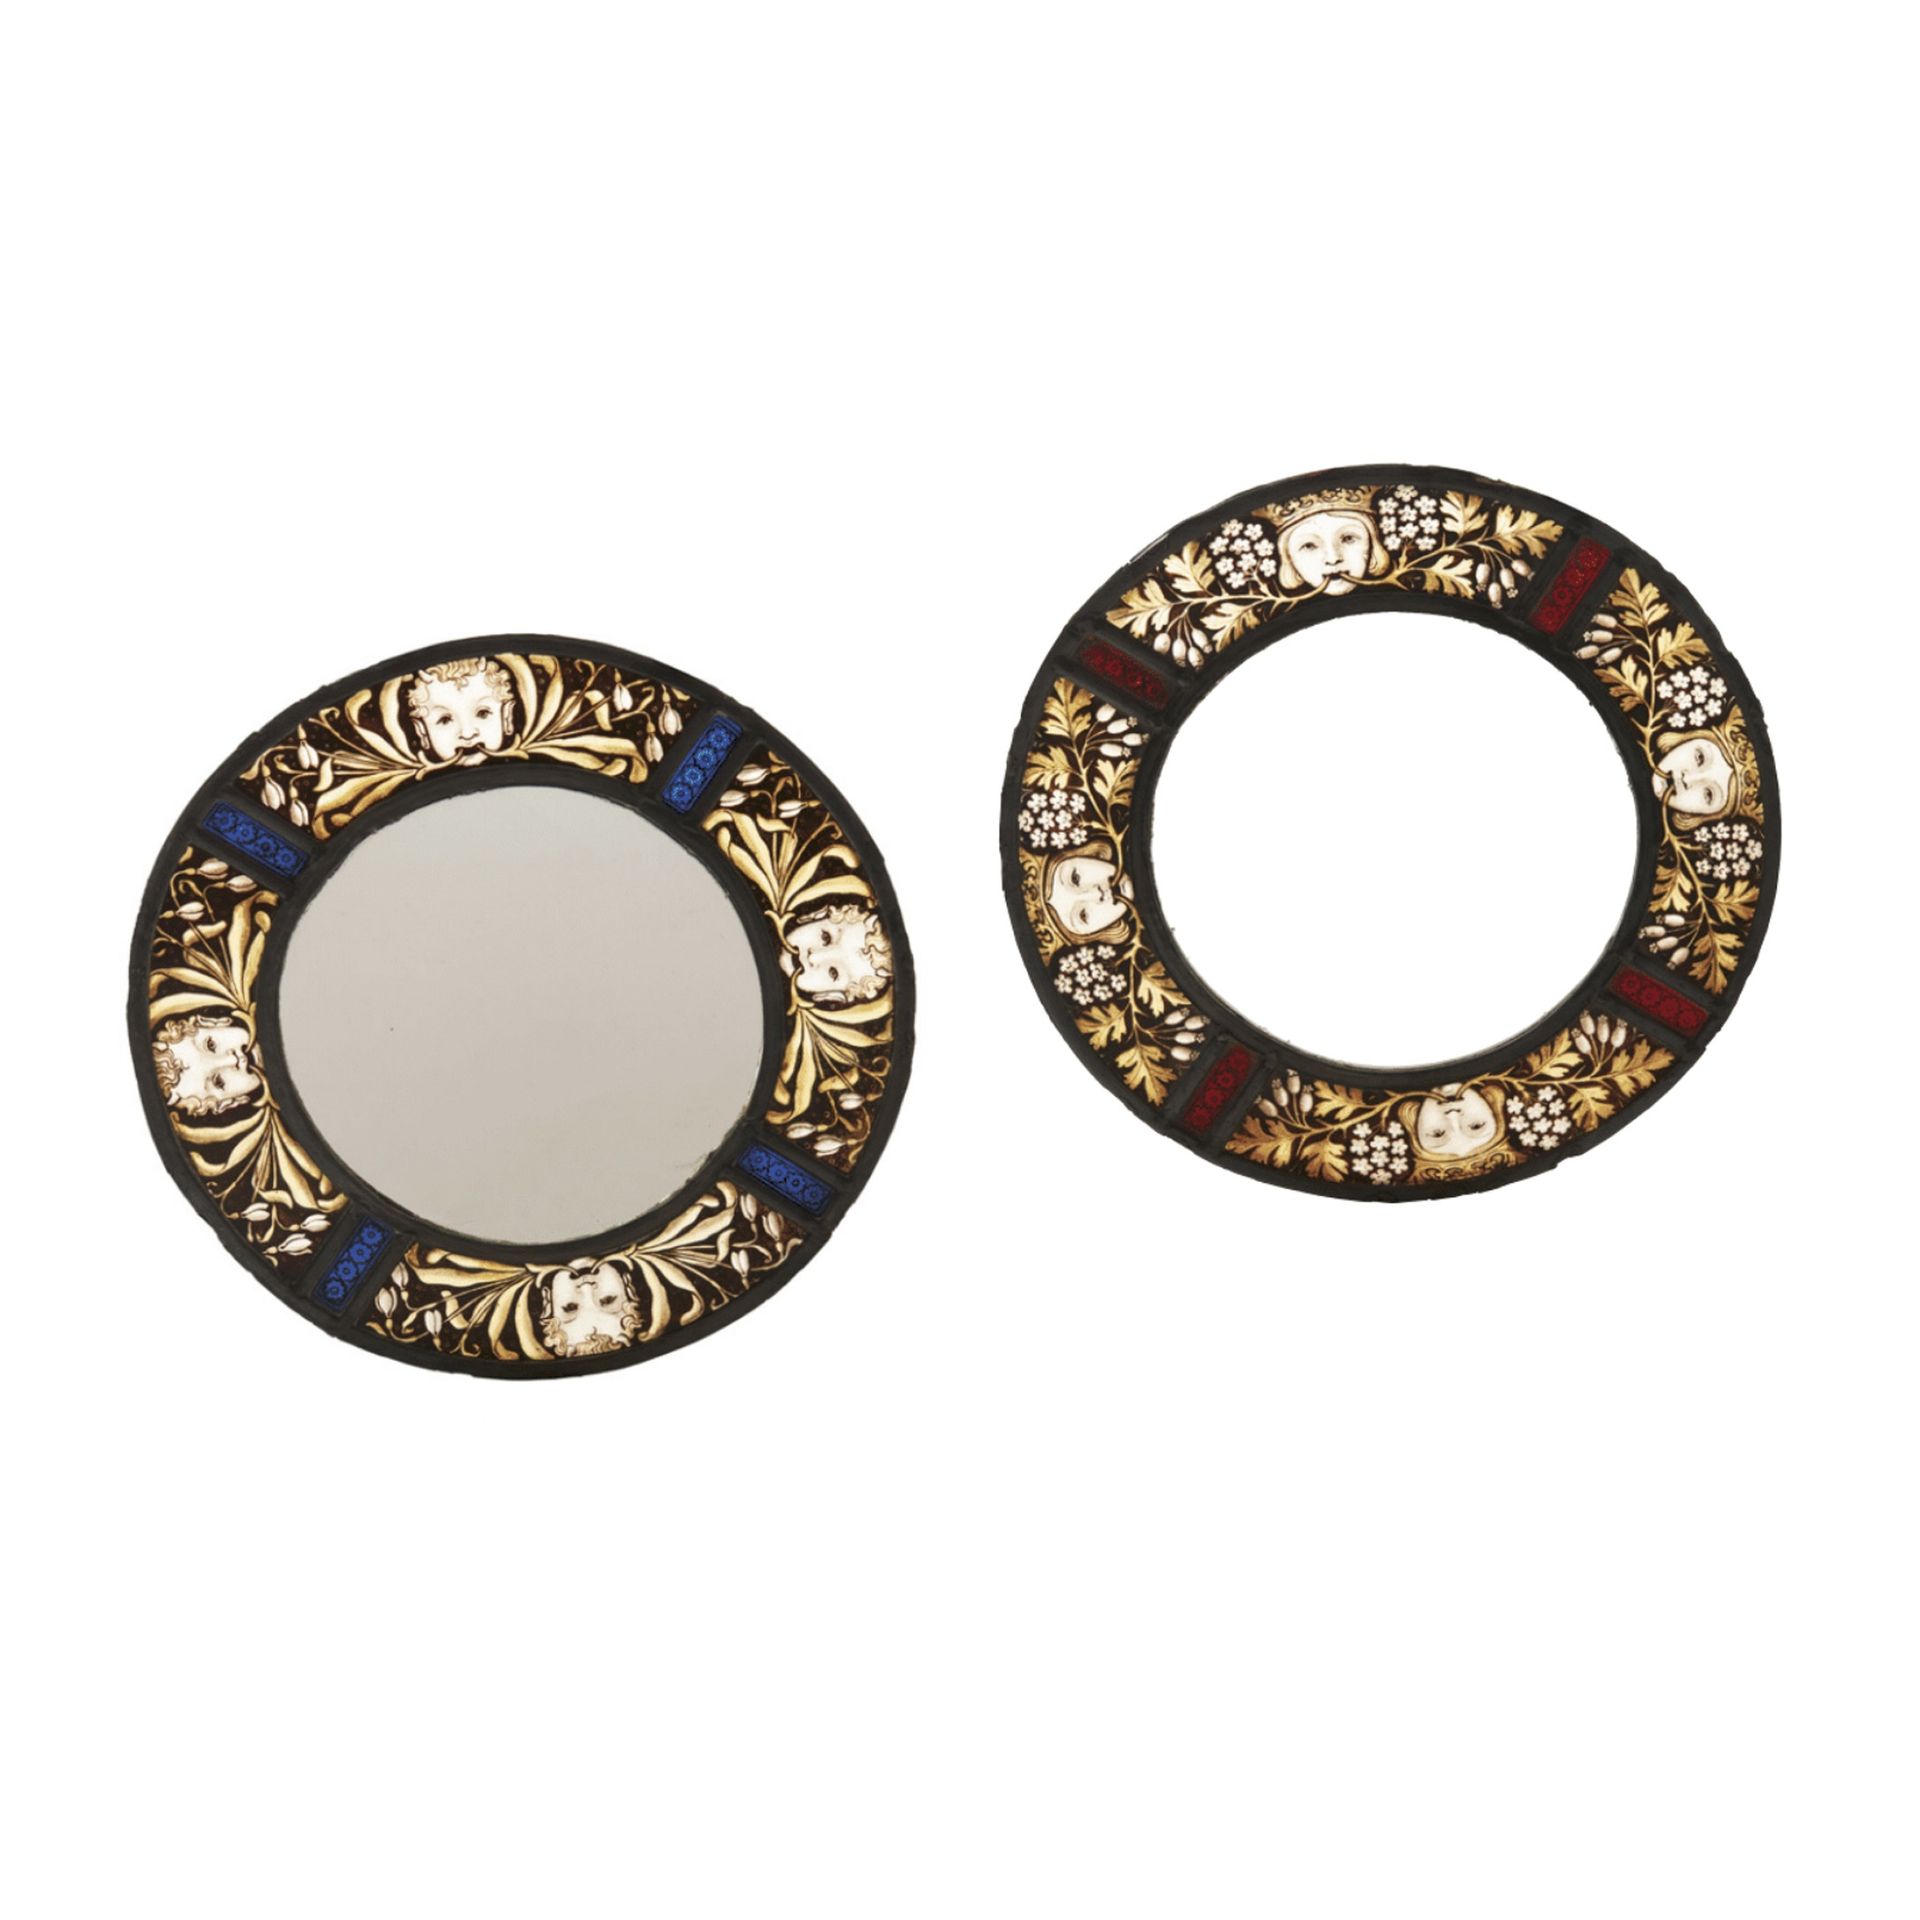 ENGLISH PAIR OF ARTS & CRAFTS STAINED GLASS ROUNDELS, CIRCA 1900 gebeiztes, bema&hellip;